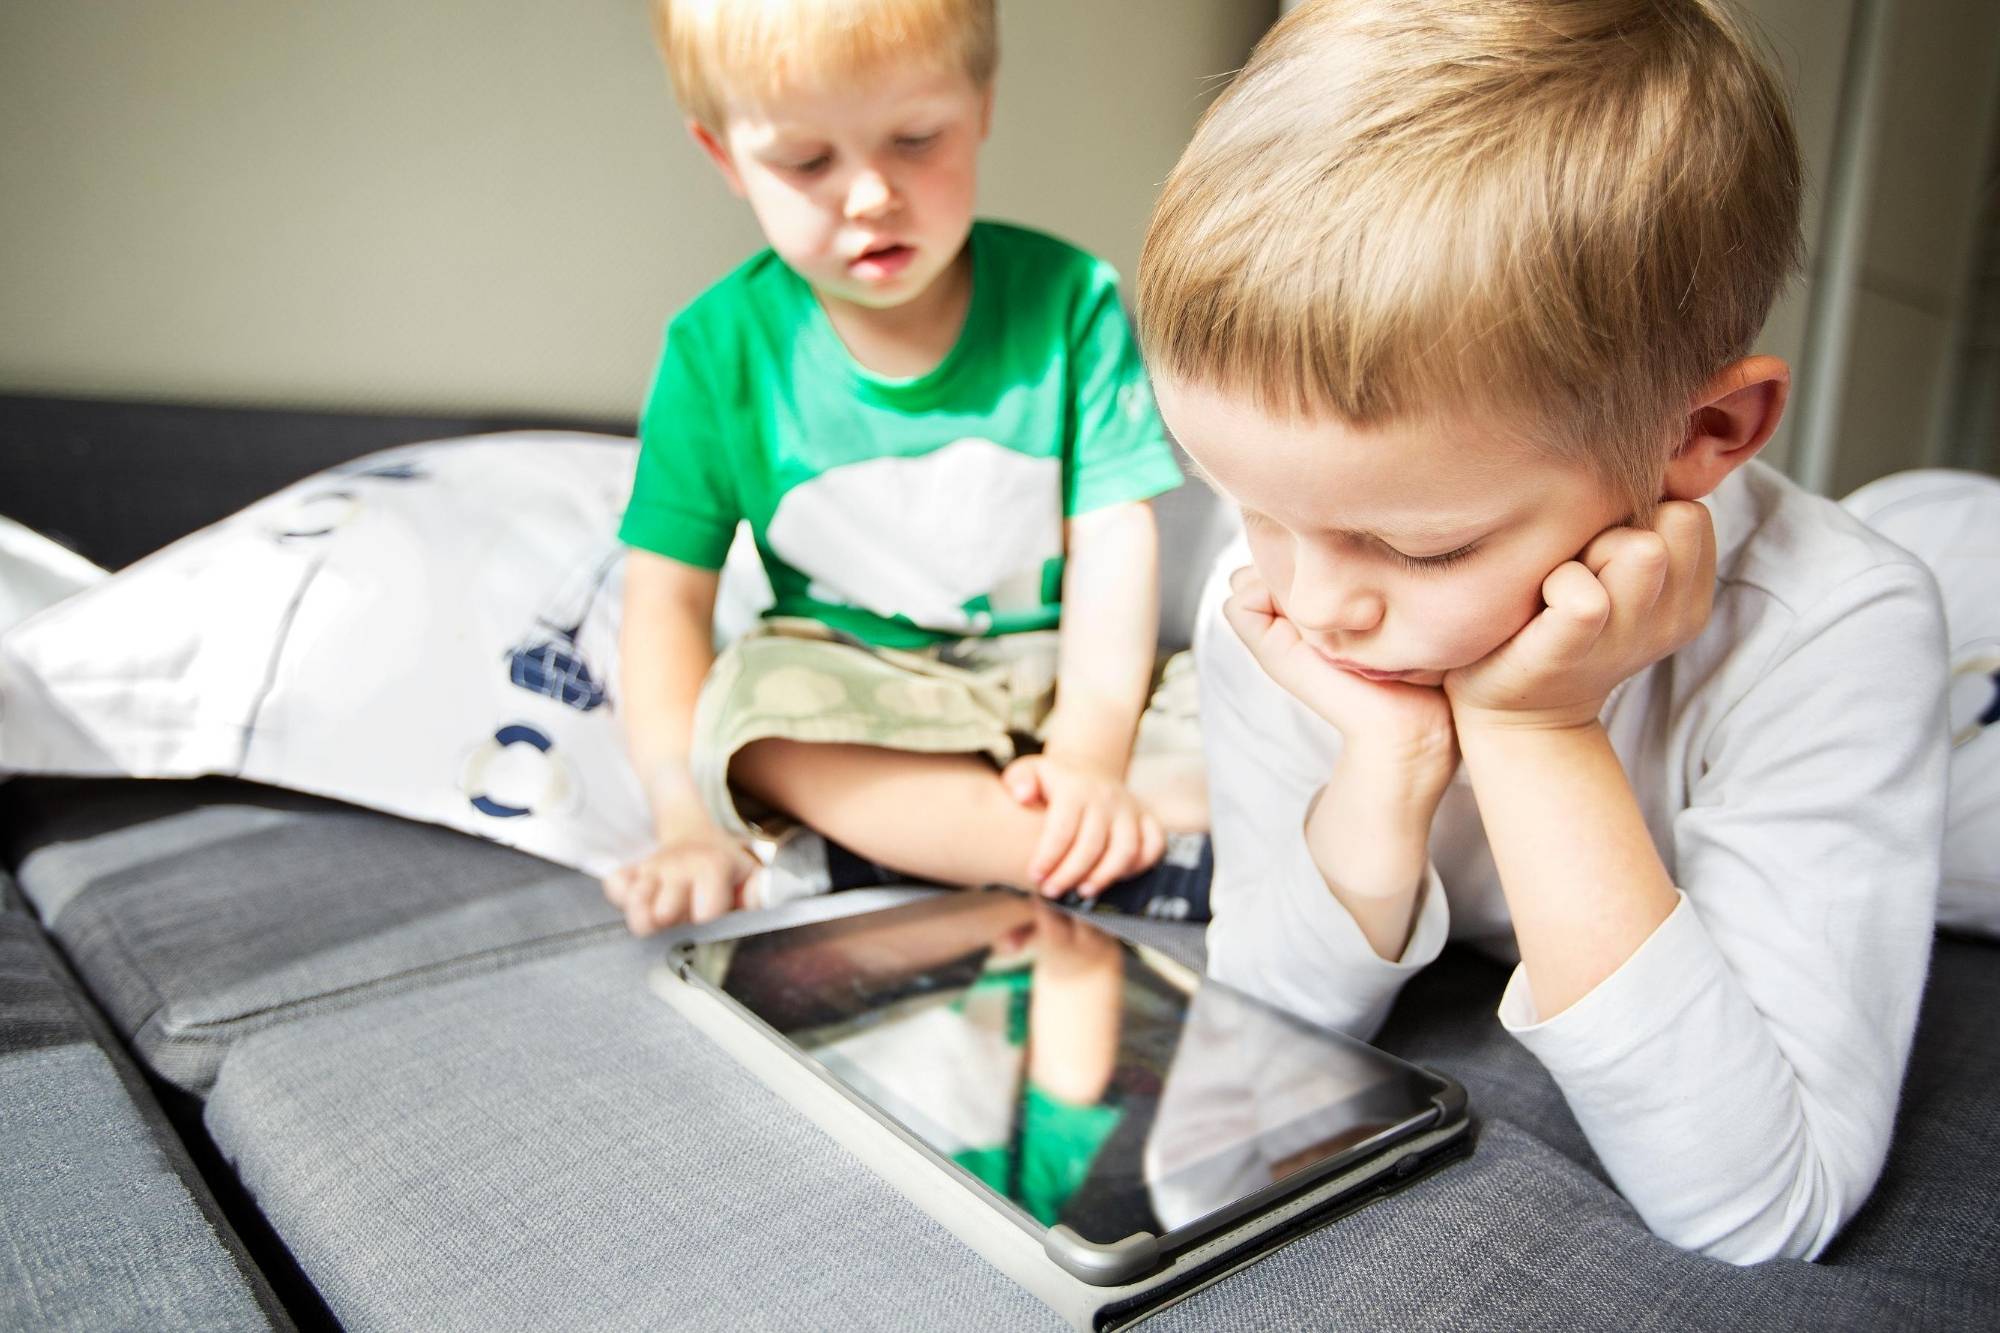 Toddlers reading an e-book on an electronic device